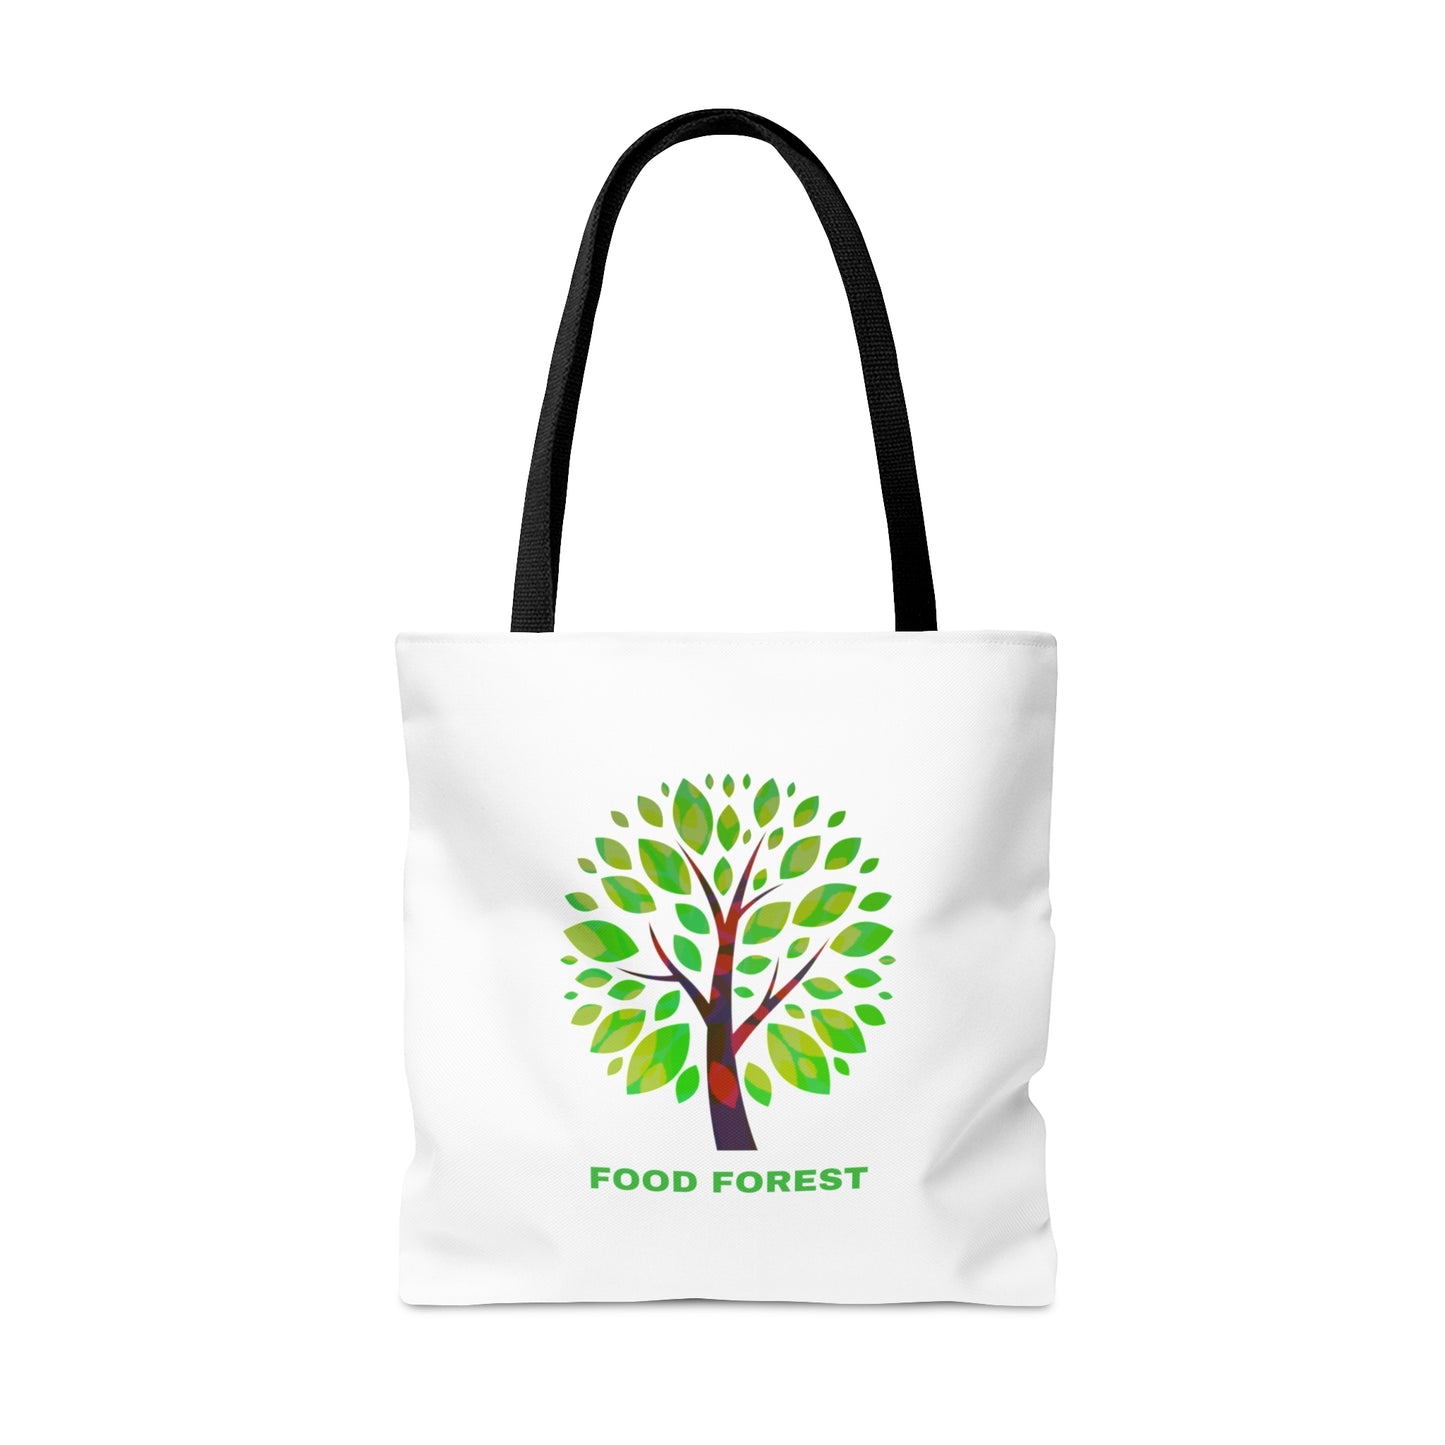 FOOD FOREST Tote Bag, White